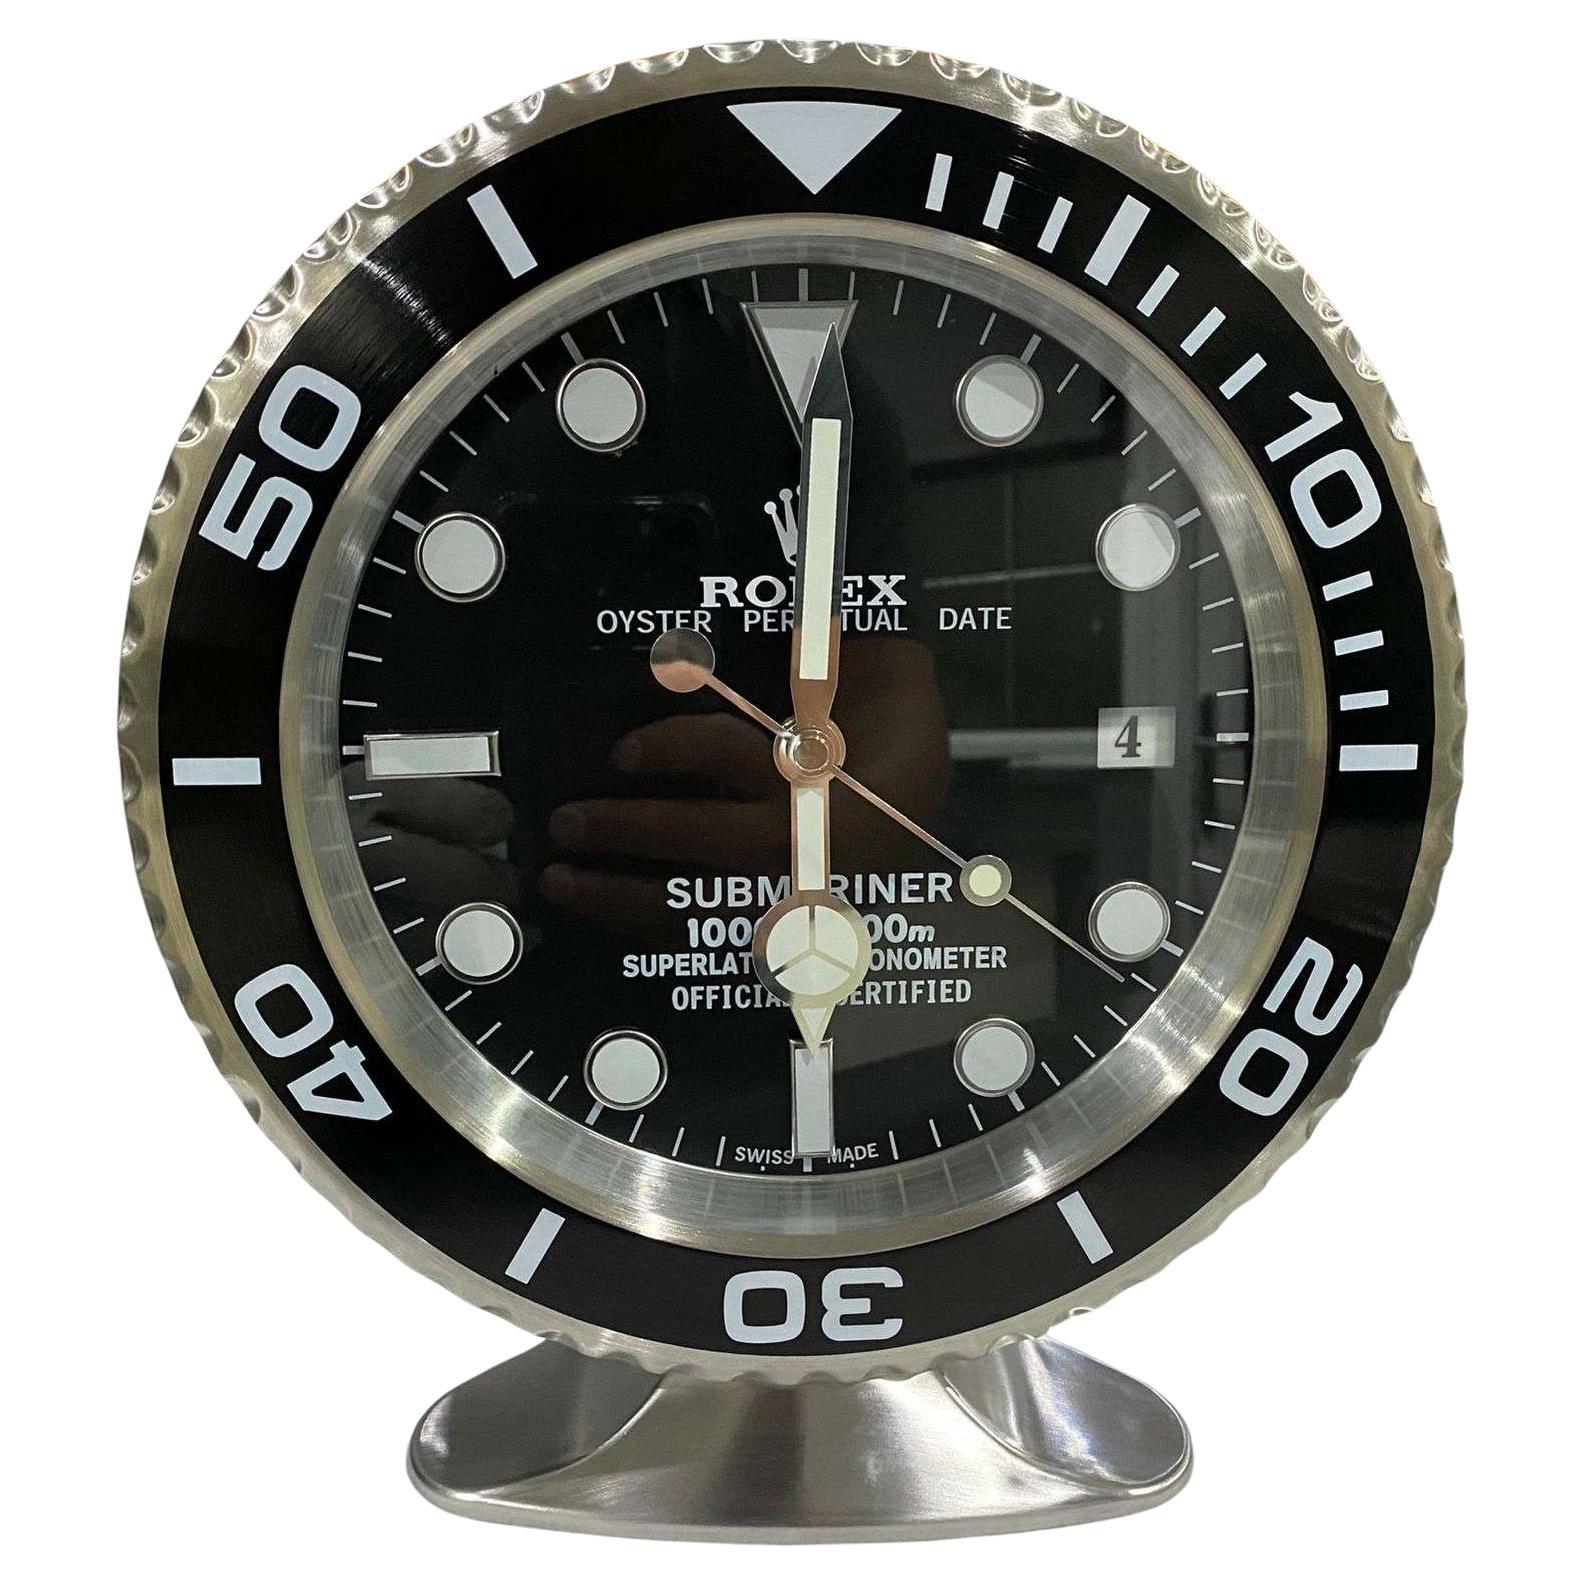 ROLEX Officially Certified Oyster Perpetual Black Submariner Desk Clock  For Sale